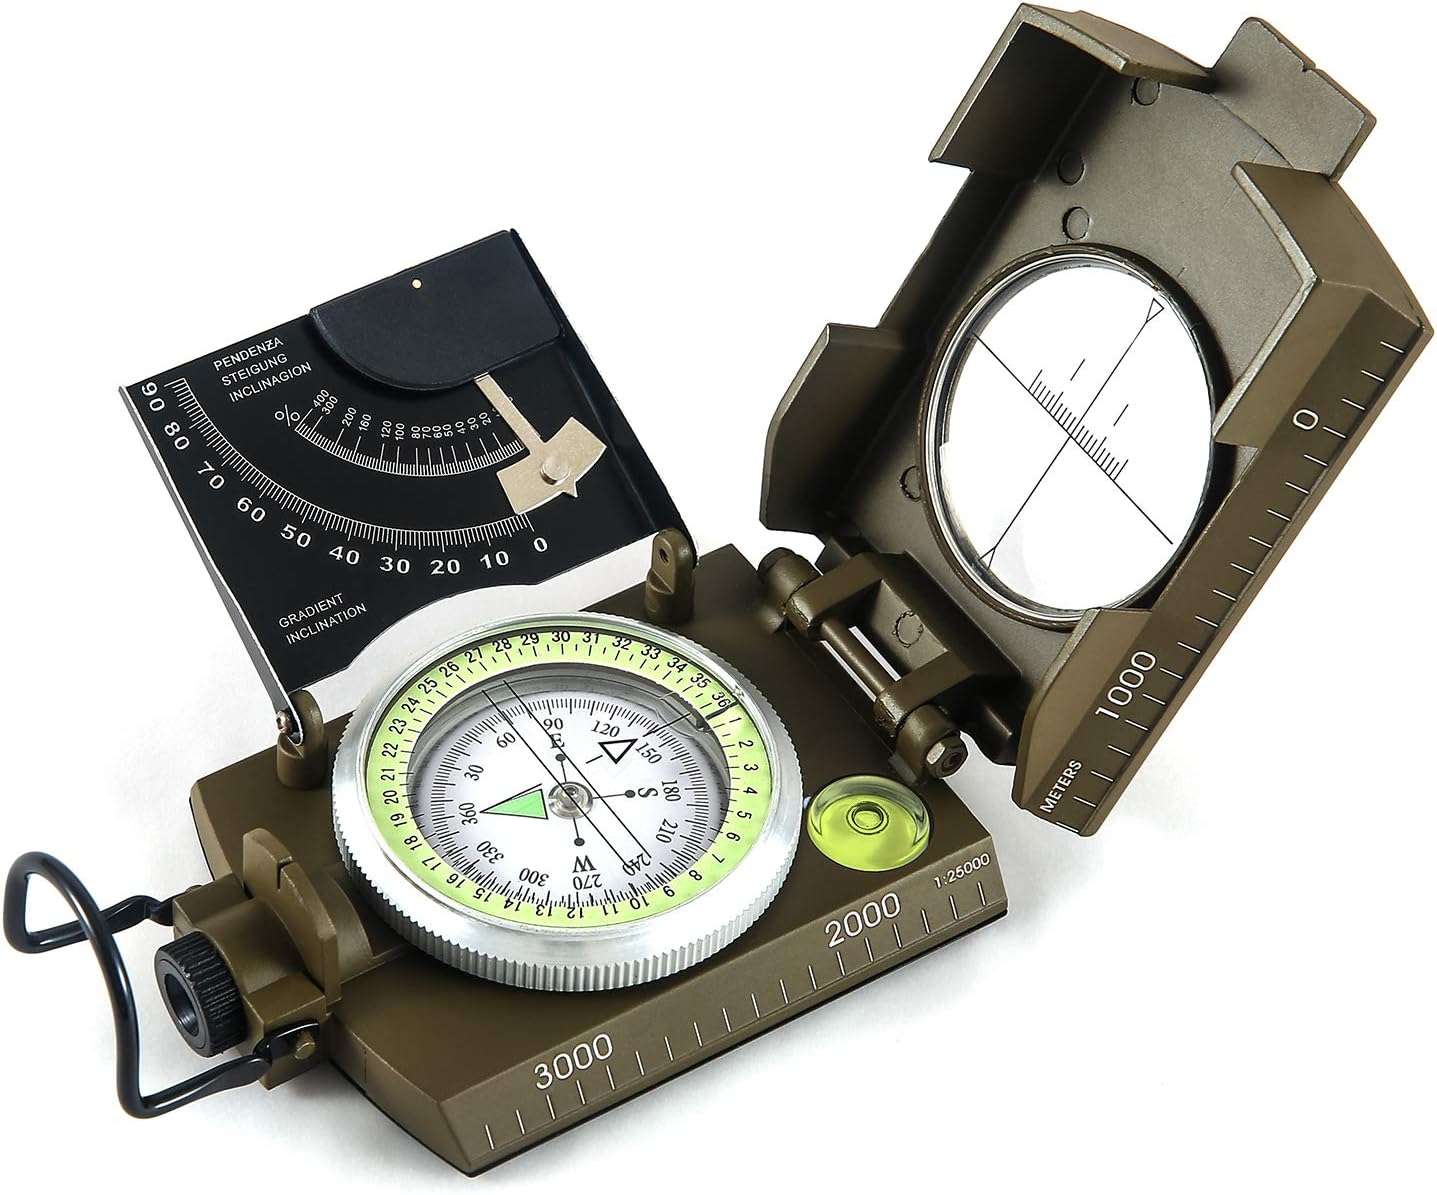 Eyeskey Multifunctional Military Sighting Navigation Compass with Inclinometer | Impact Resistant & Waterproof Compass for Hiking, Camping